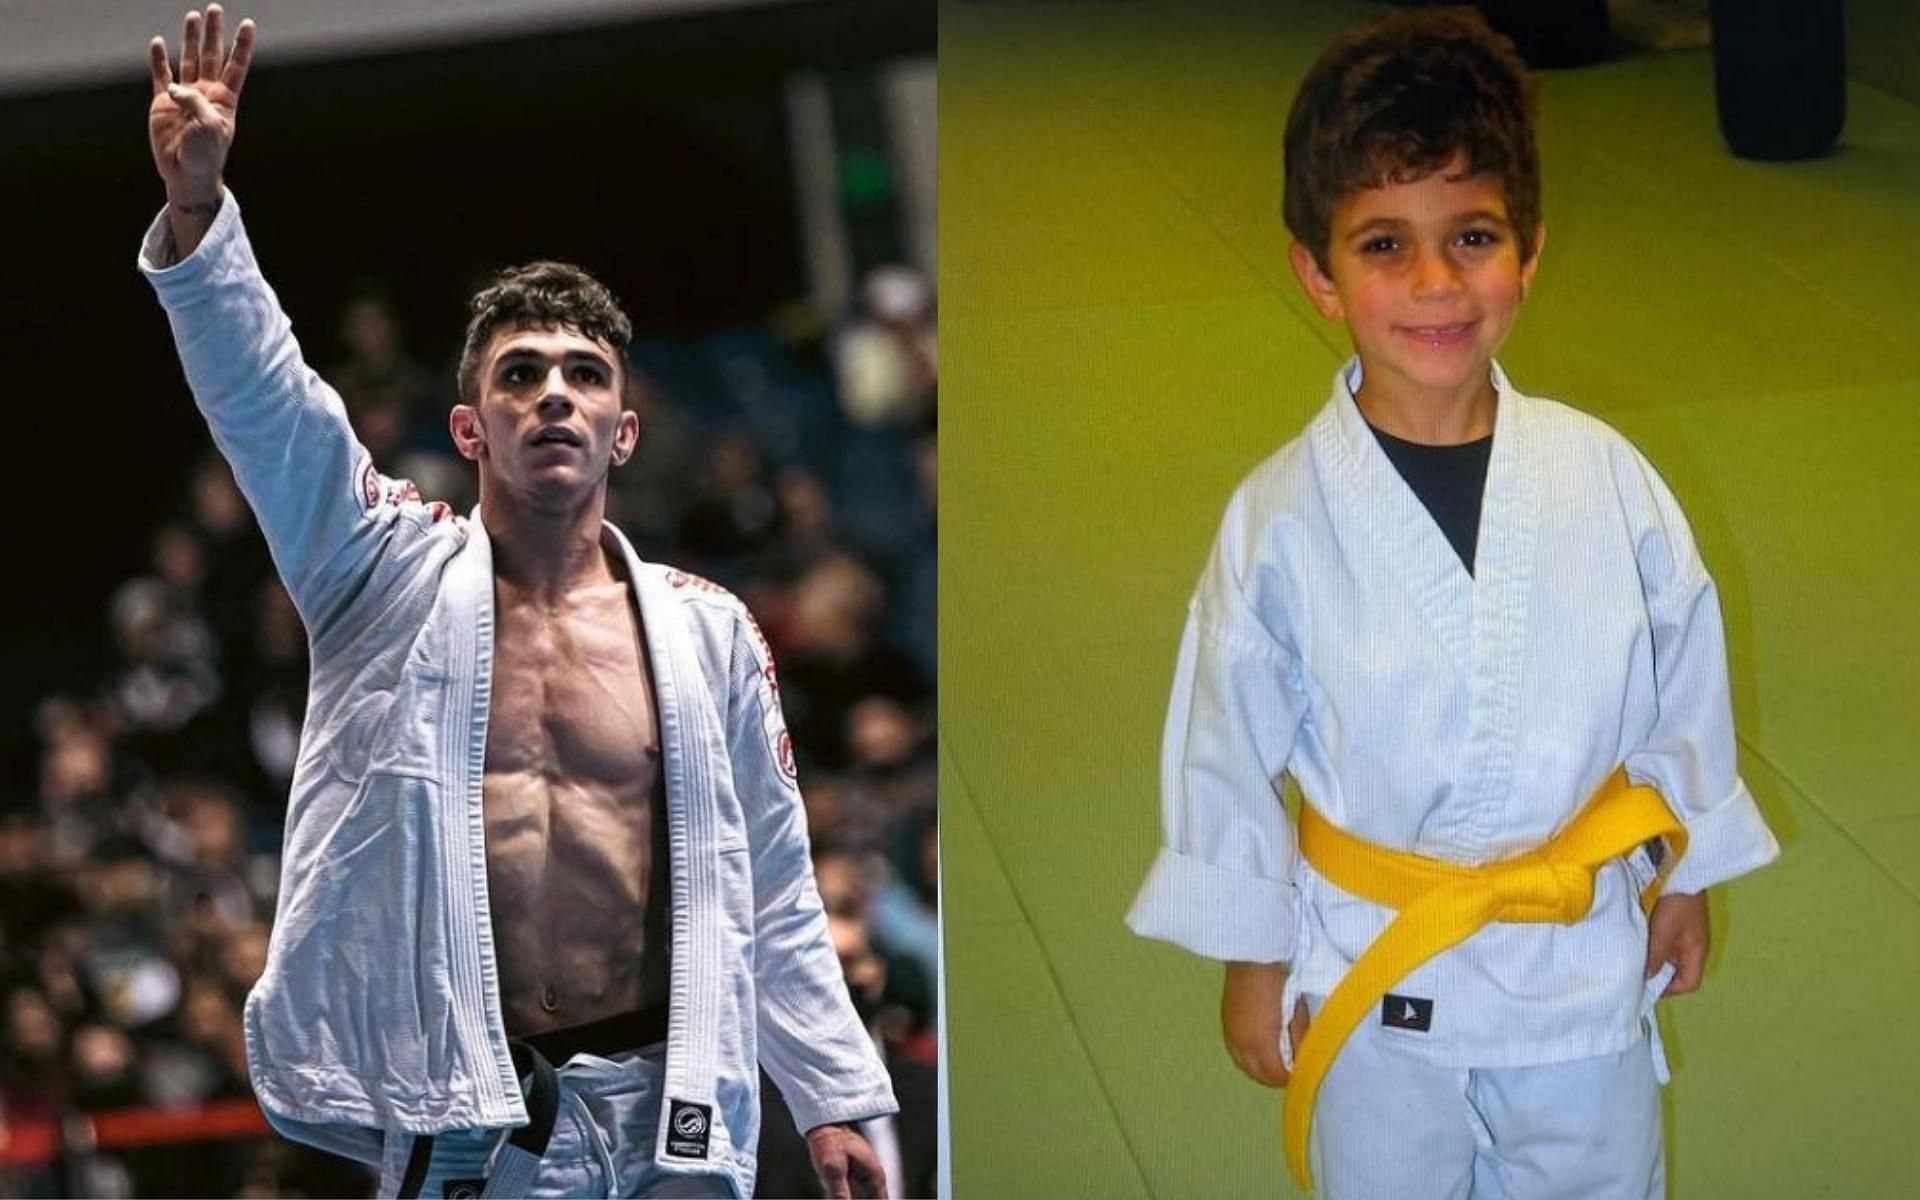 ONE Championship&#039;s Mikey Musumeci has been training in Jiu-jitsu since he was 4 years old. (Images courtesy of @mikeymusumeci on Instagram)